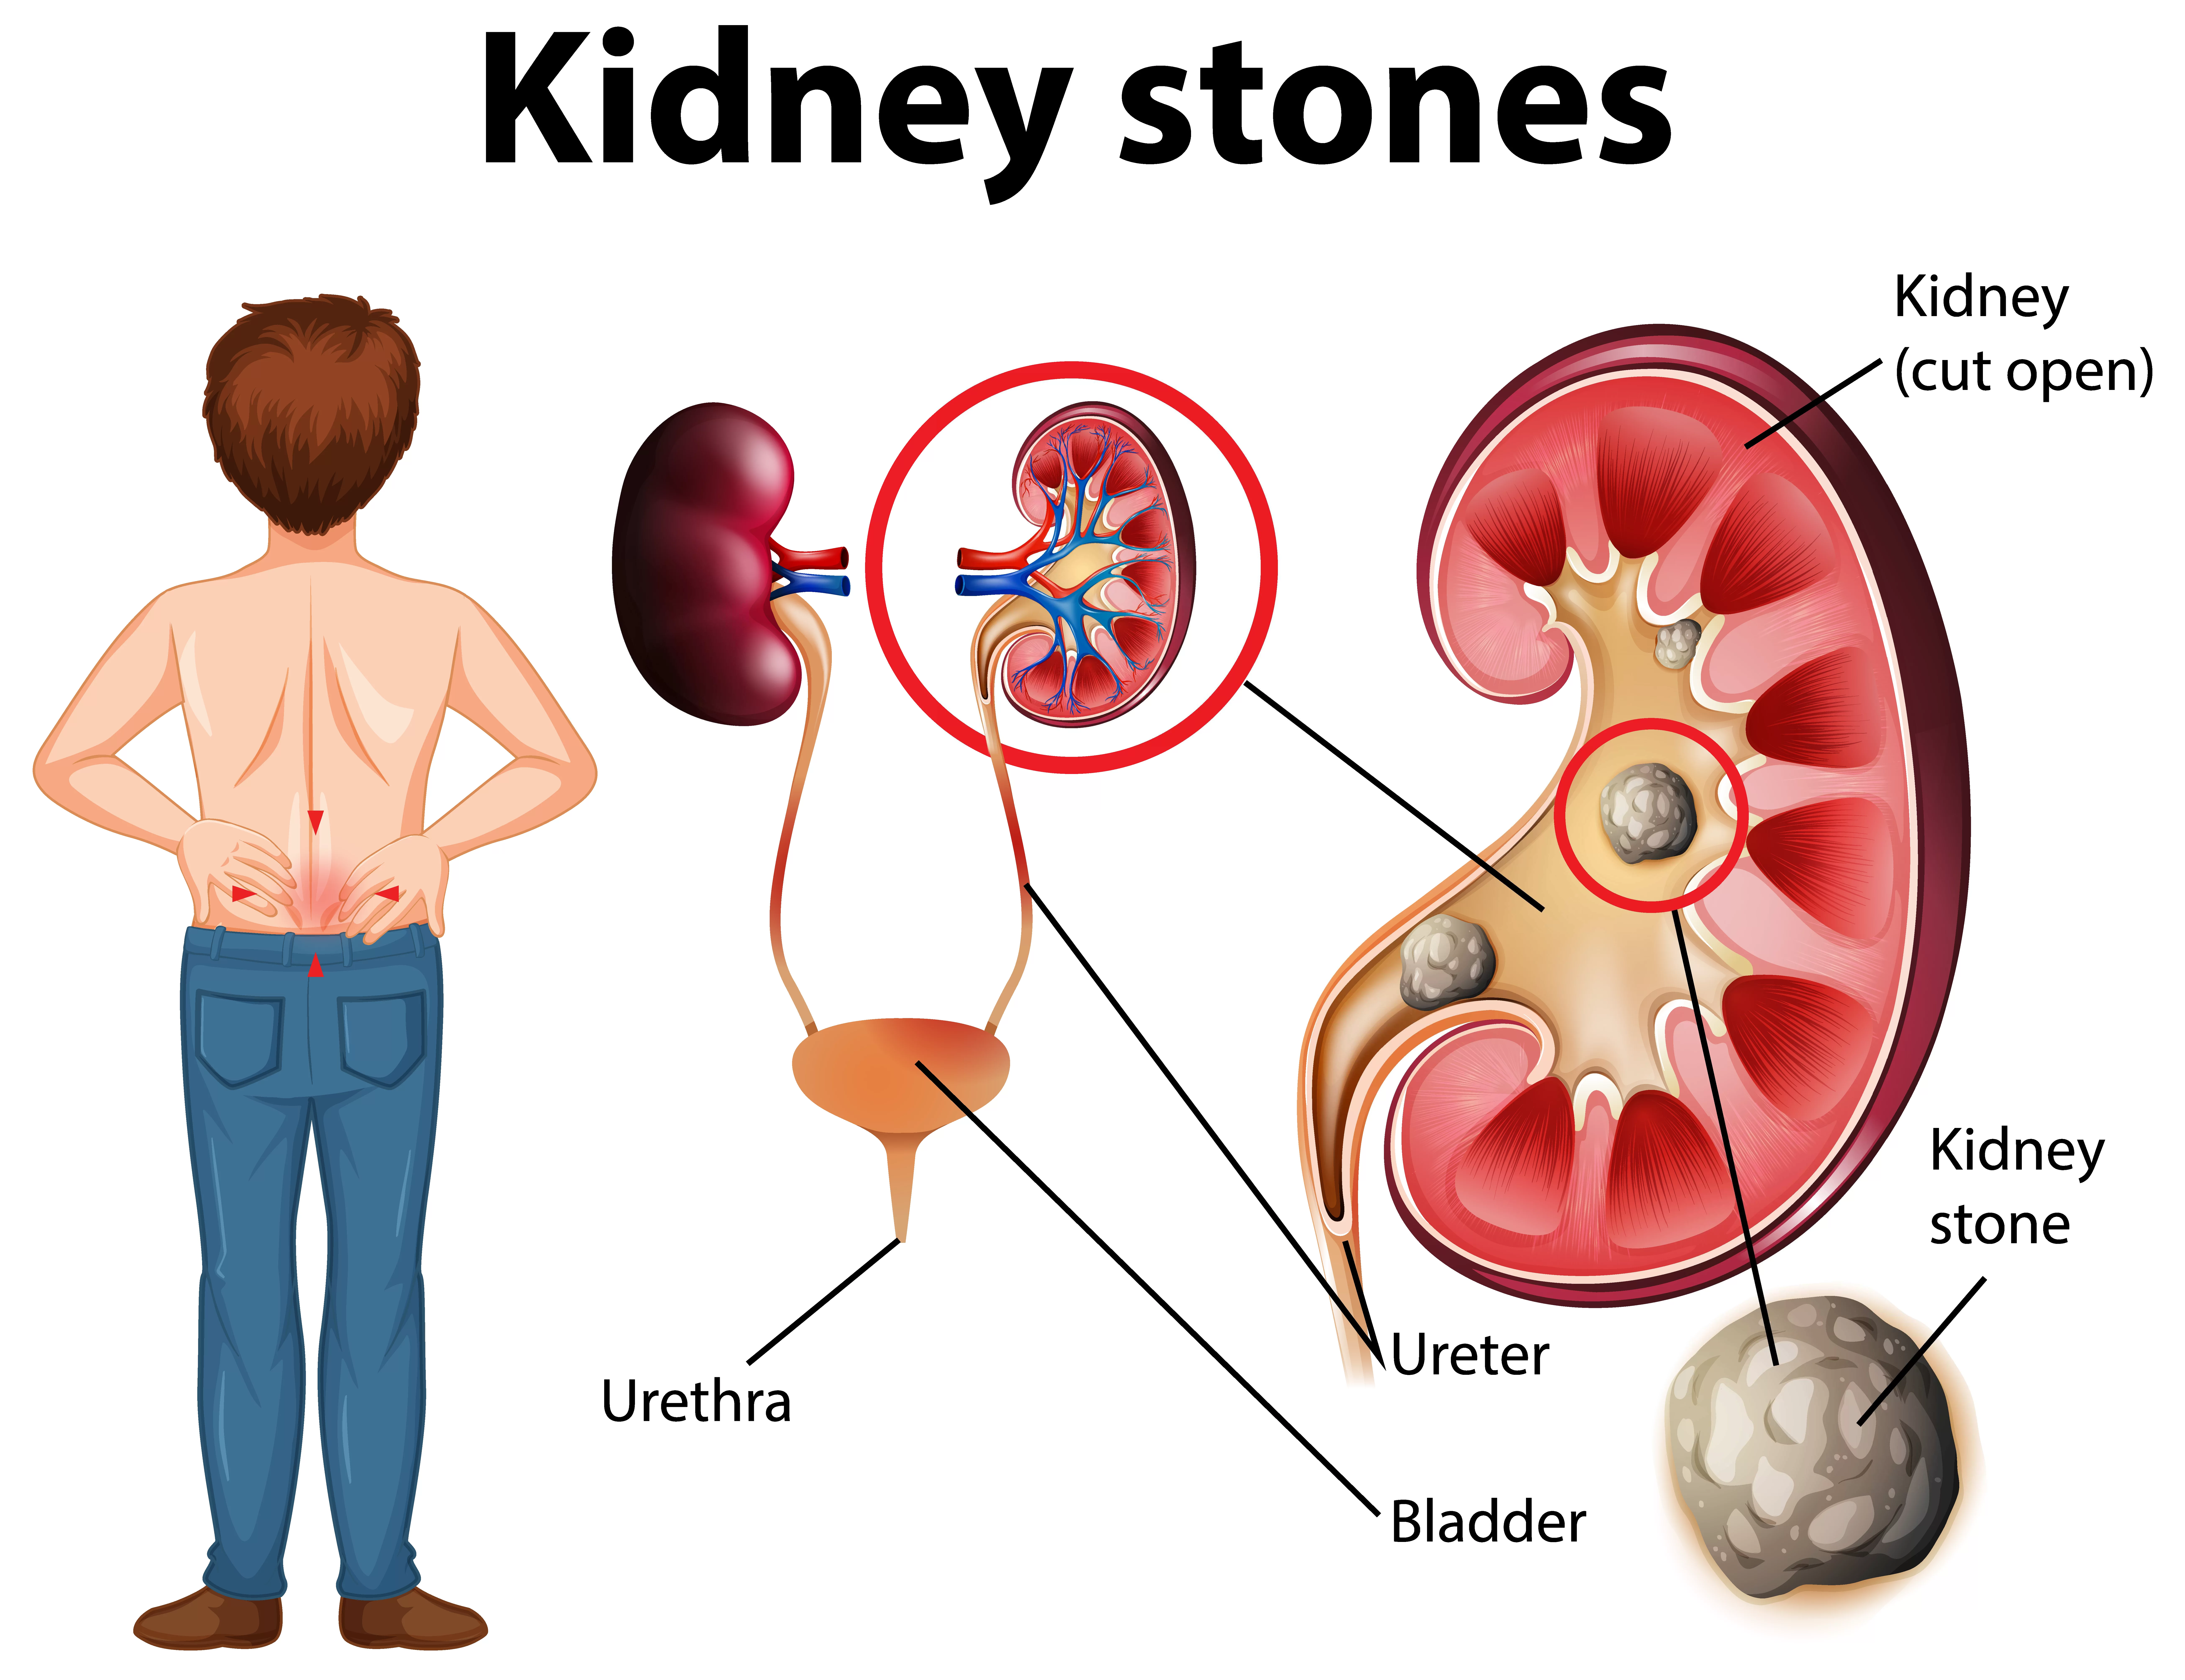 Image-showing-the-presence-of-stone-in-kidney-and-urethera